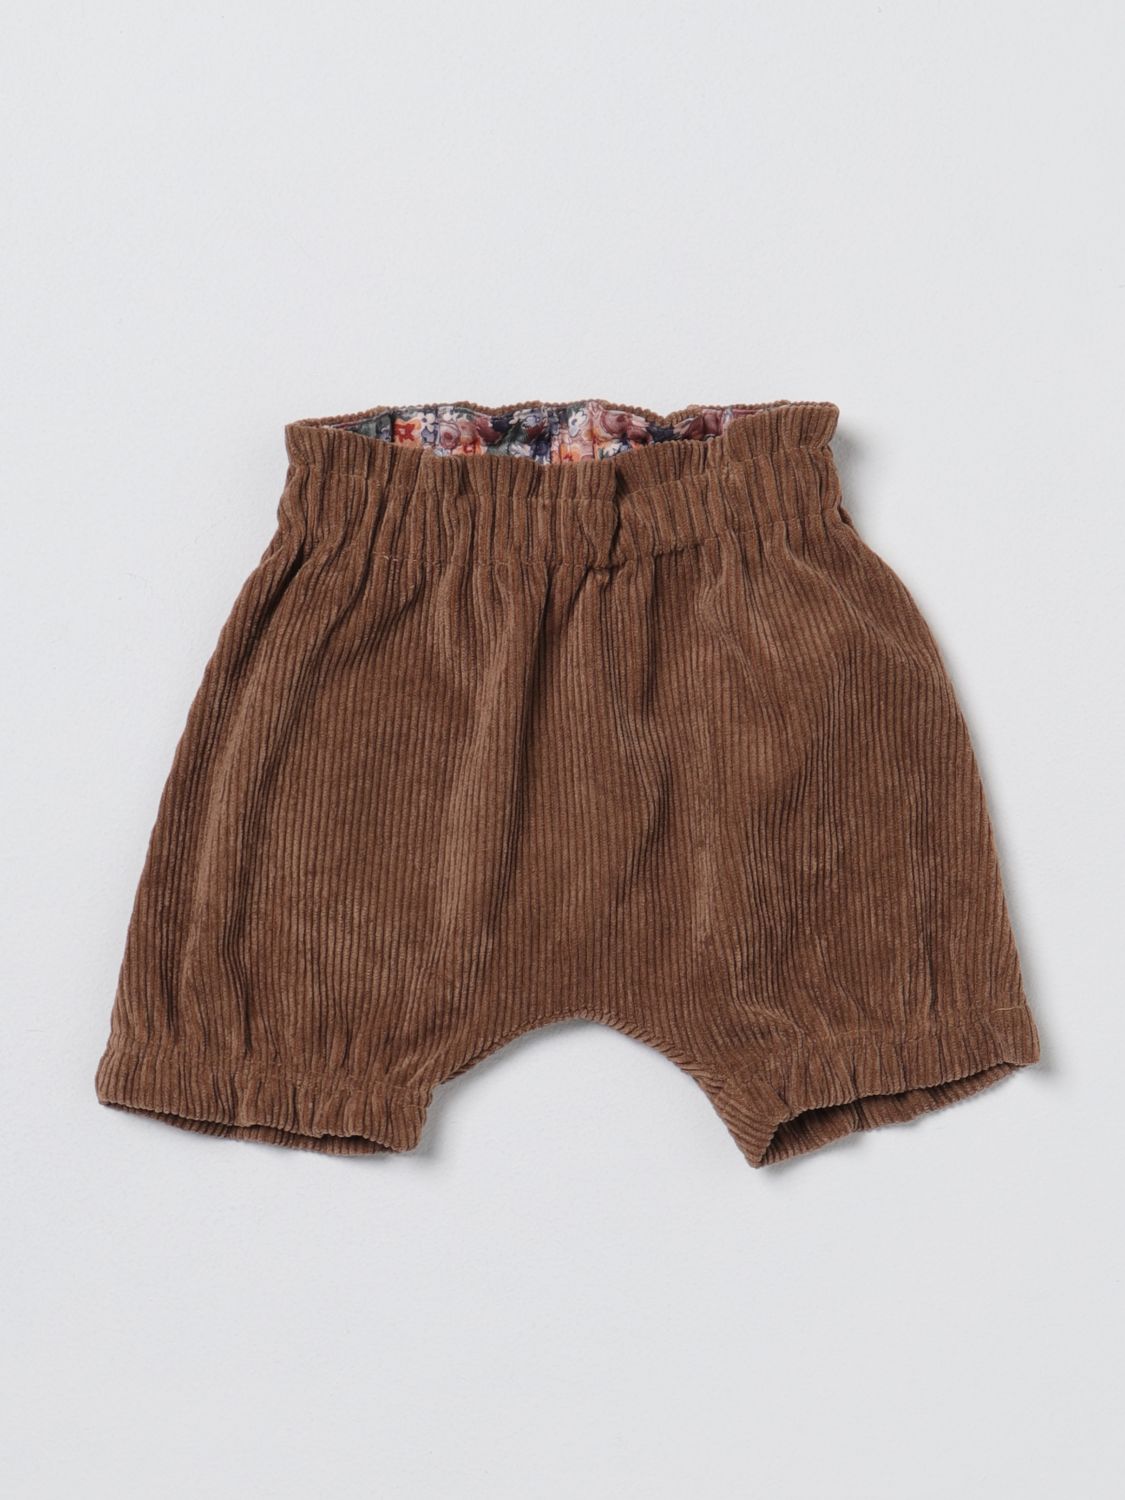 Caffe' D'orzo Trousers CAFFE' D'ORZO Kids colour Brown